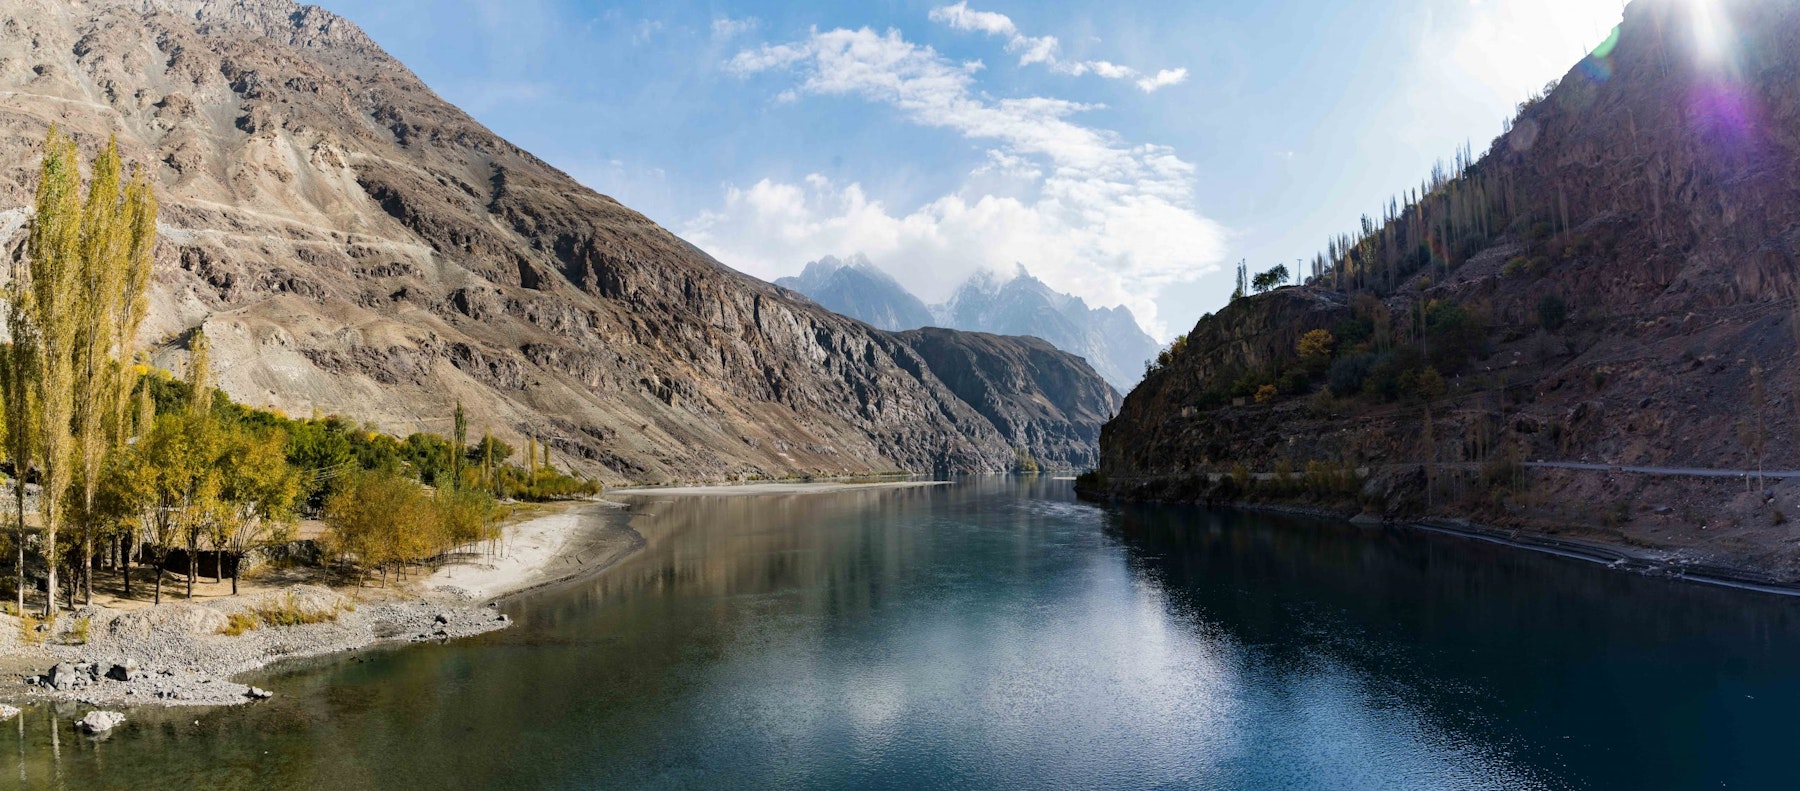 A sparsely populated and mountainous region that is prone to seismic shocks, Gilgit-Baltistan lacks the resources required to mitigate and adapt to the growing number of climate related disasters.